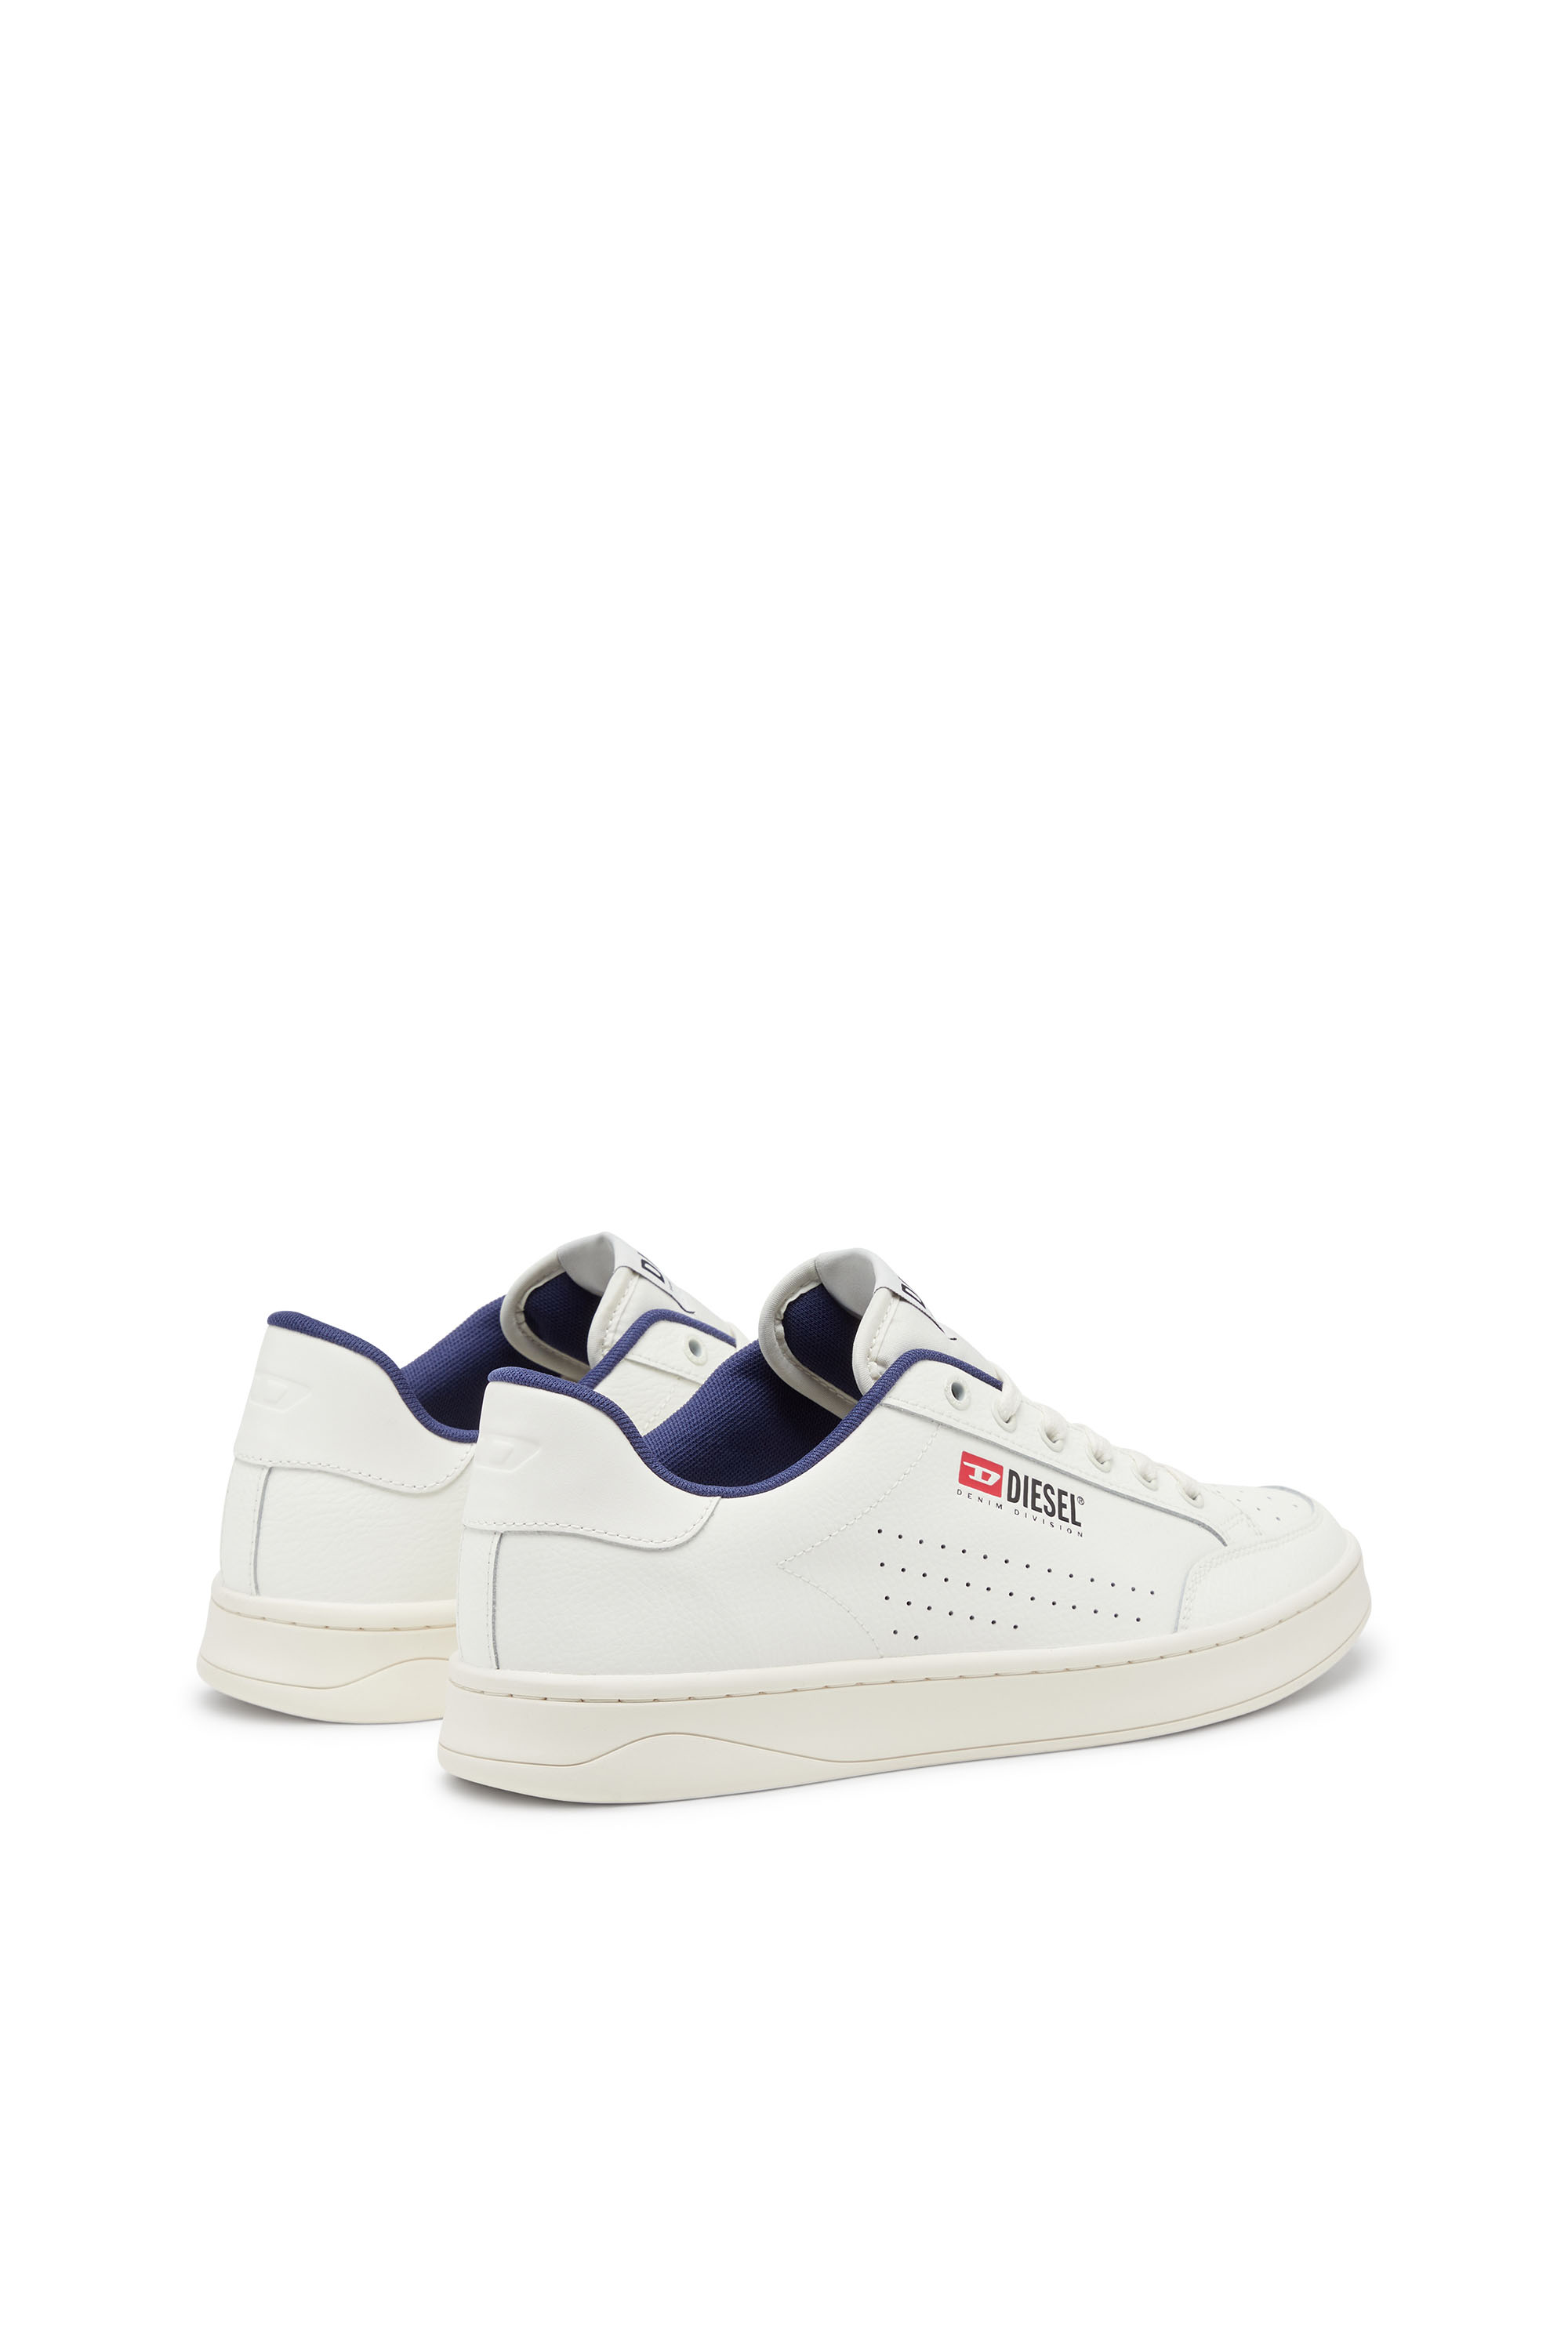 Diesel - S-ATHENE VTG, Male S-Athene-Retro sneakers in perforated leather in Multicolor - Image 3